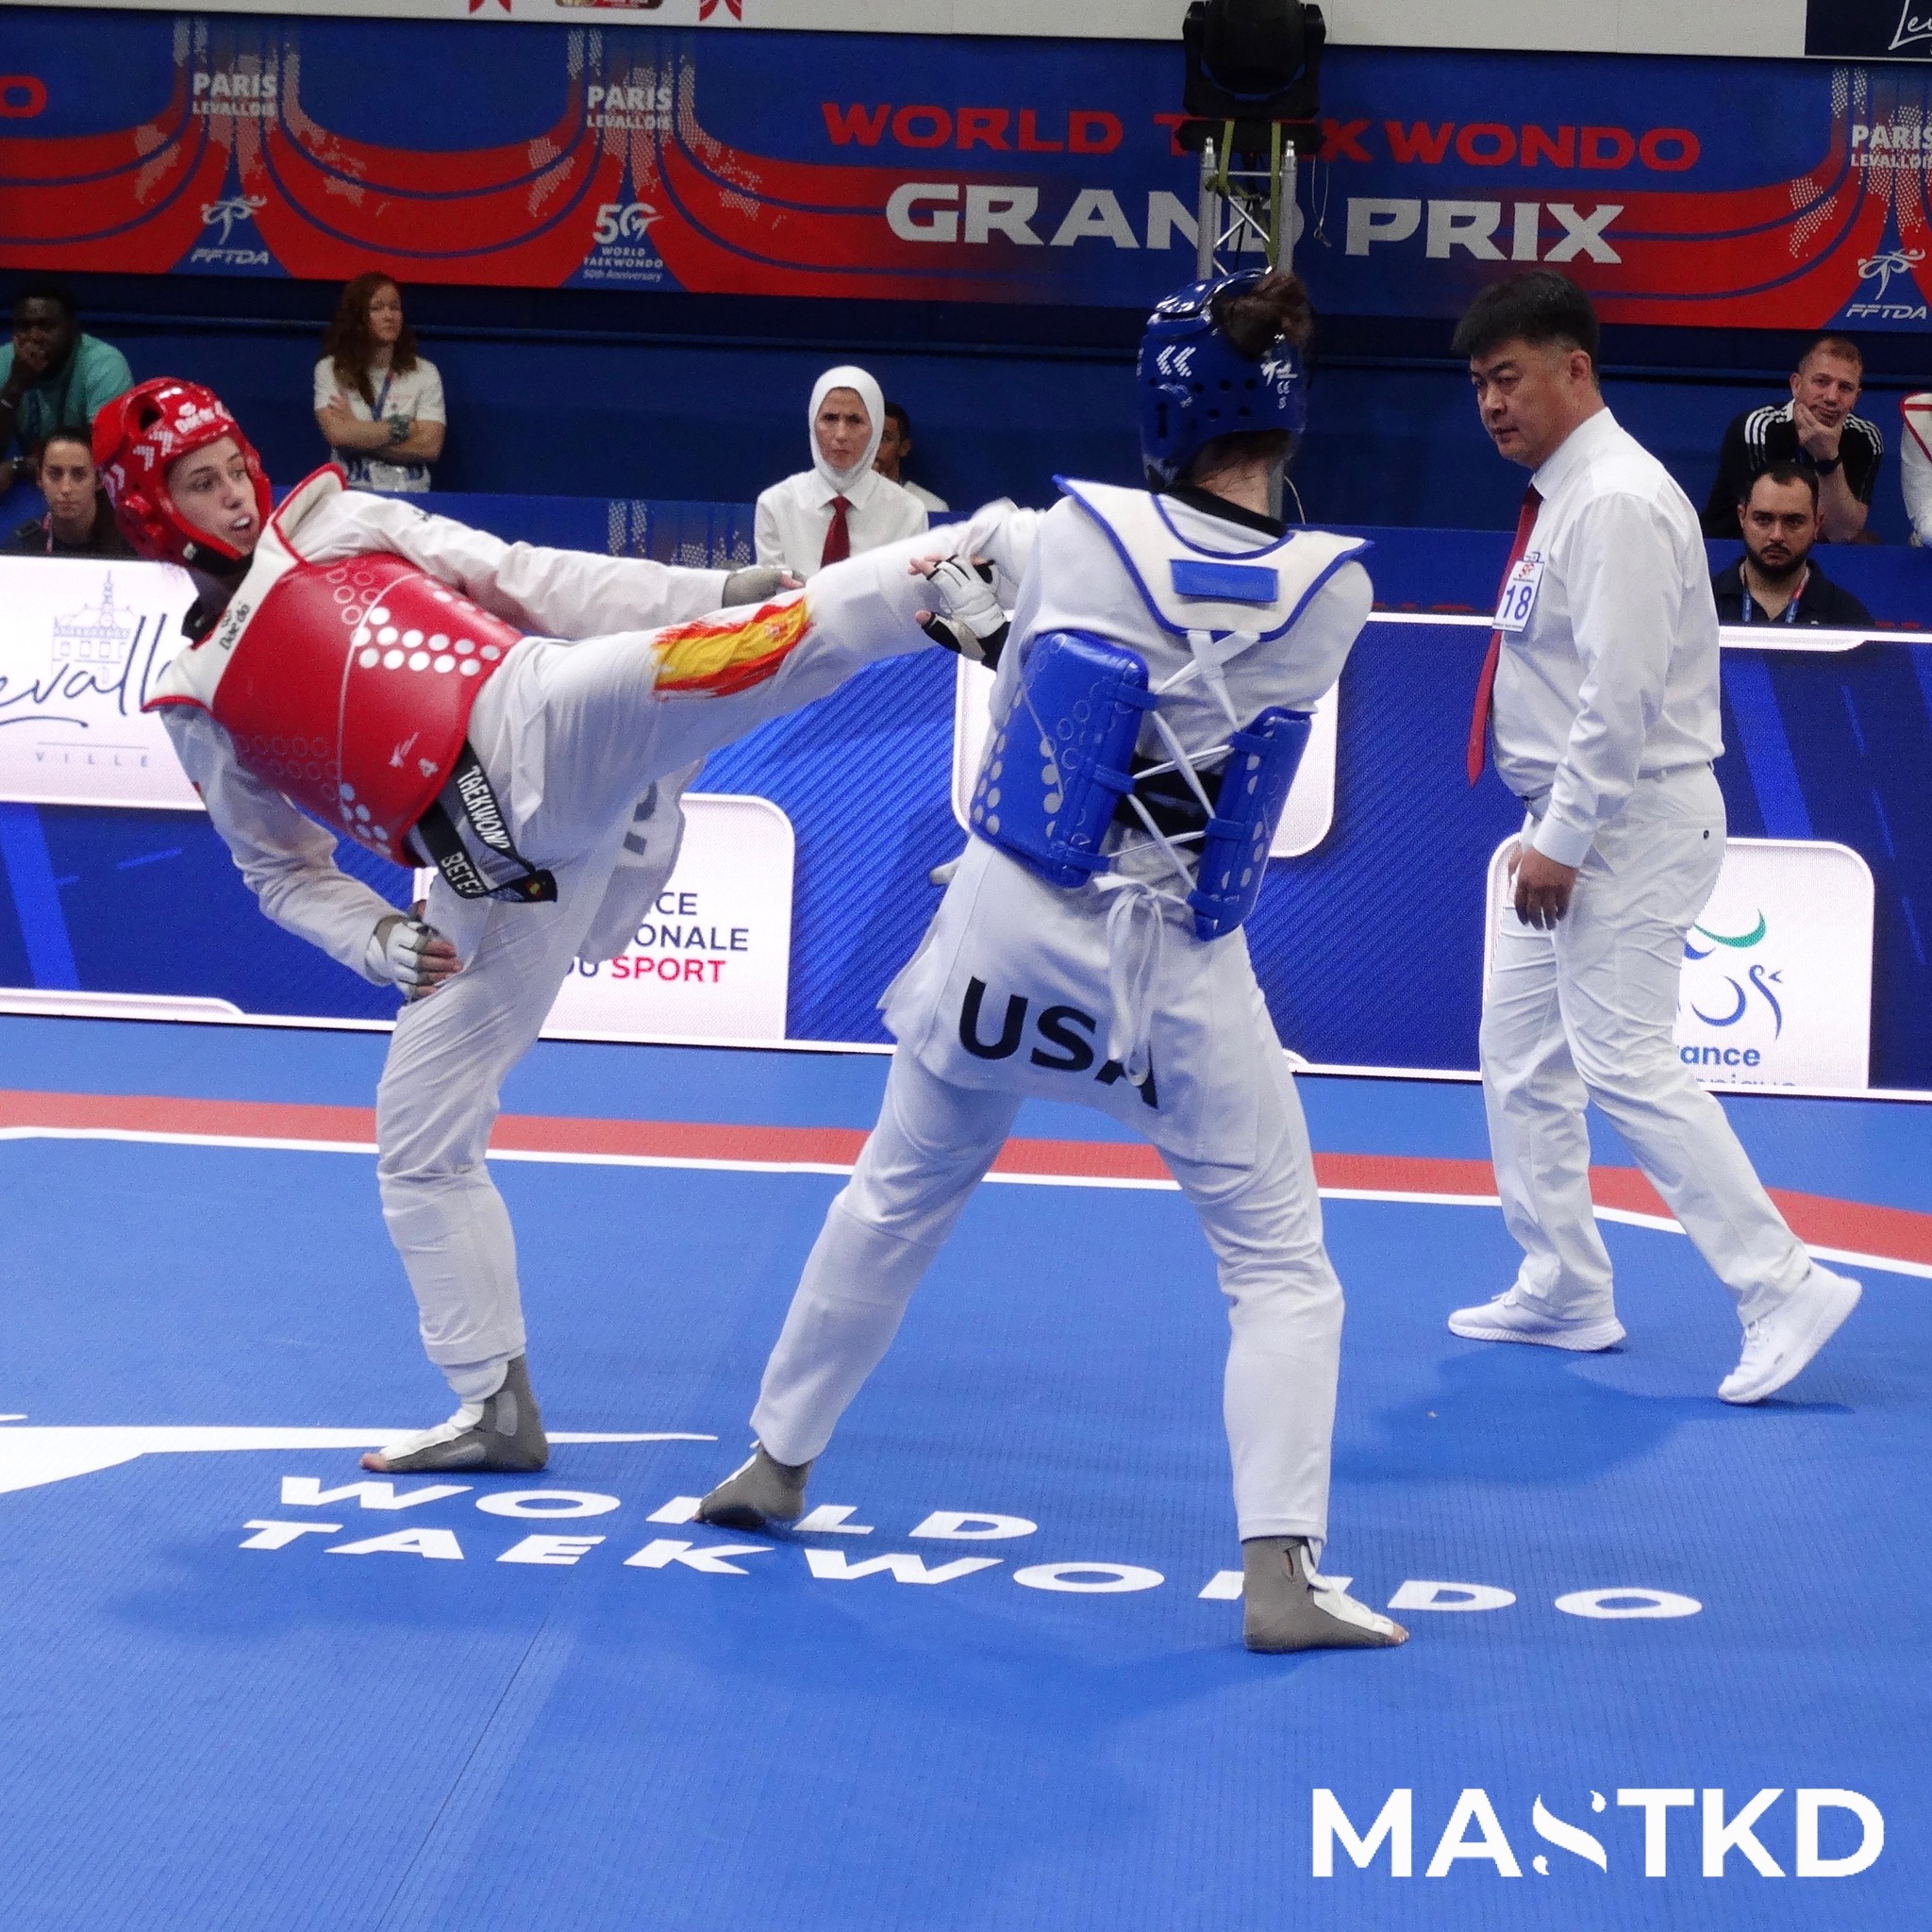 <strong>Paris 2023 World Taekwondo Grand Prix concludes with golds for France and Cote D’Ivoire</strong>